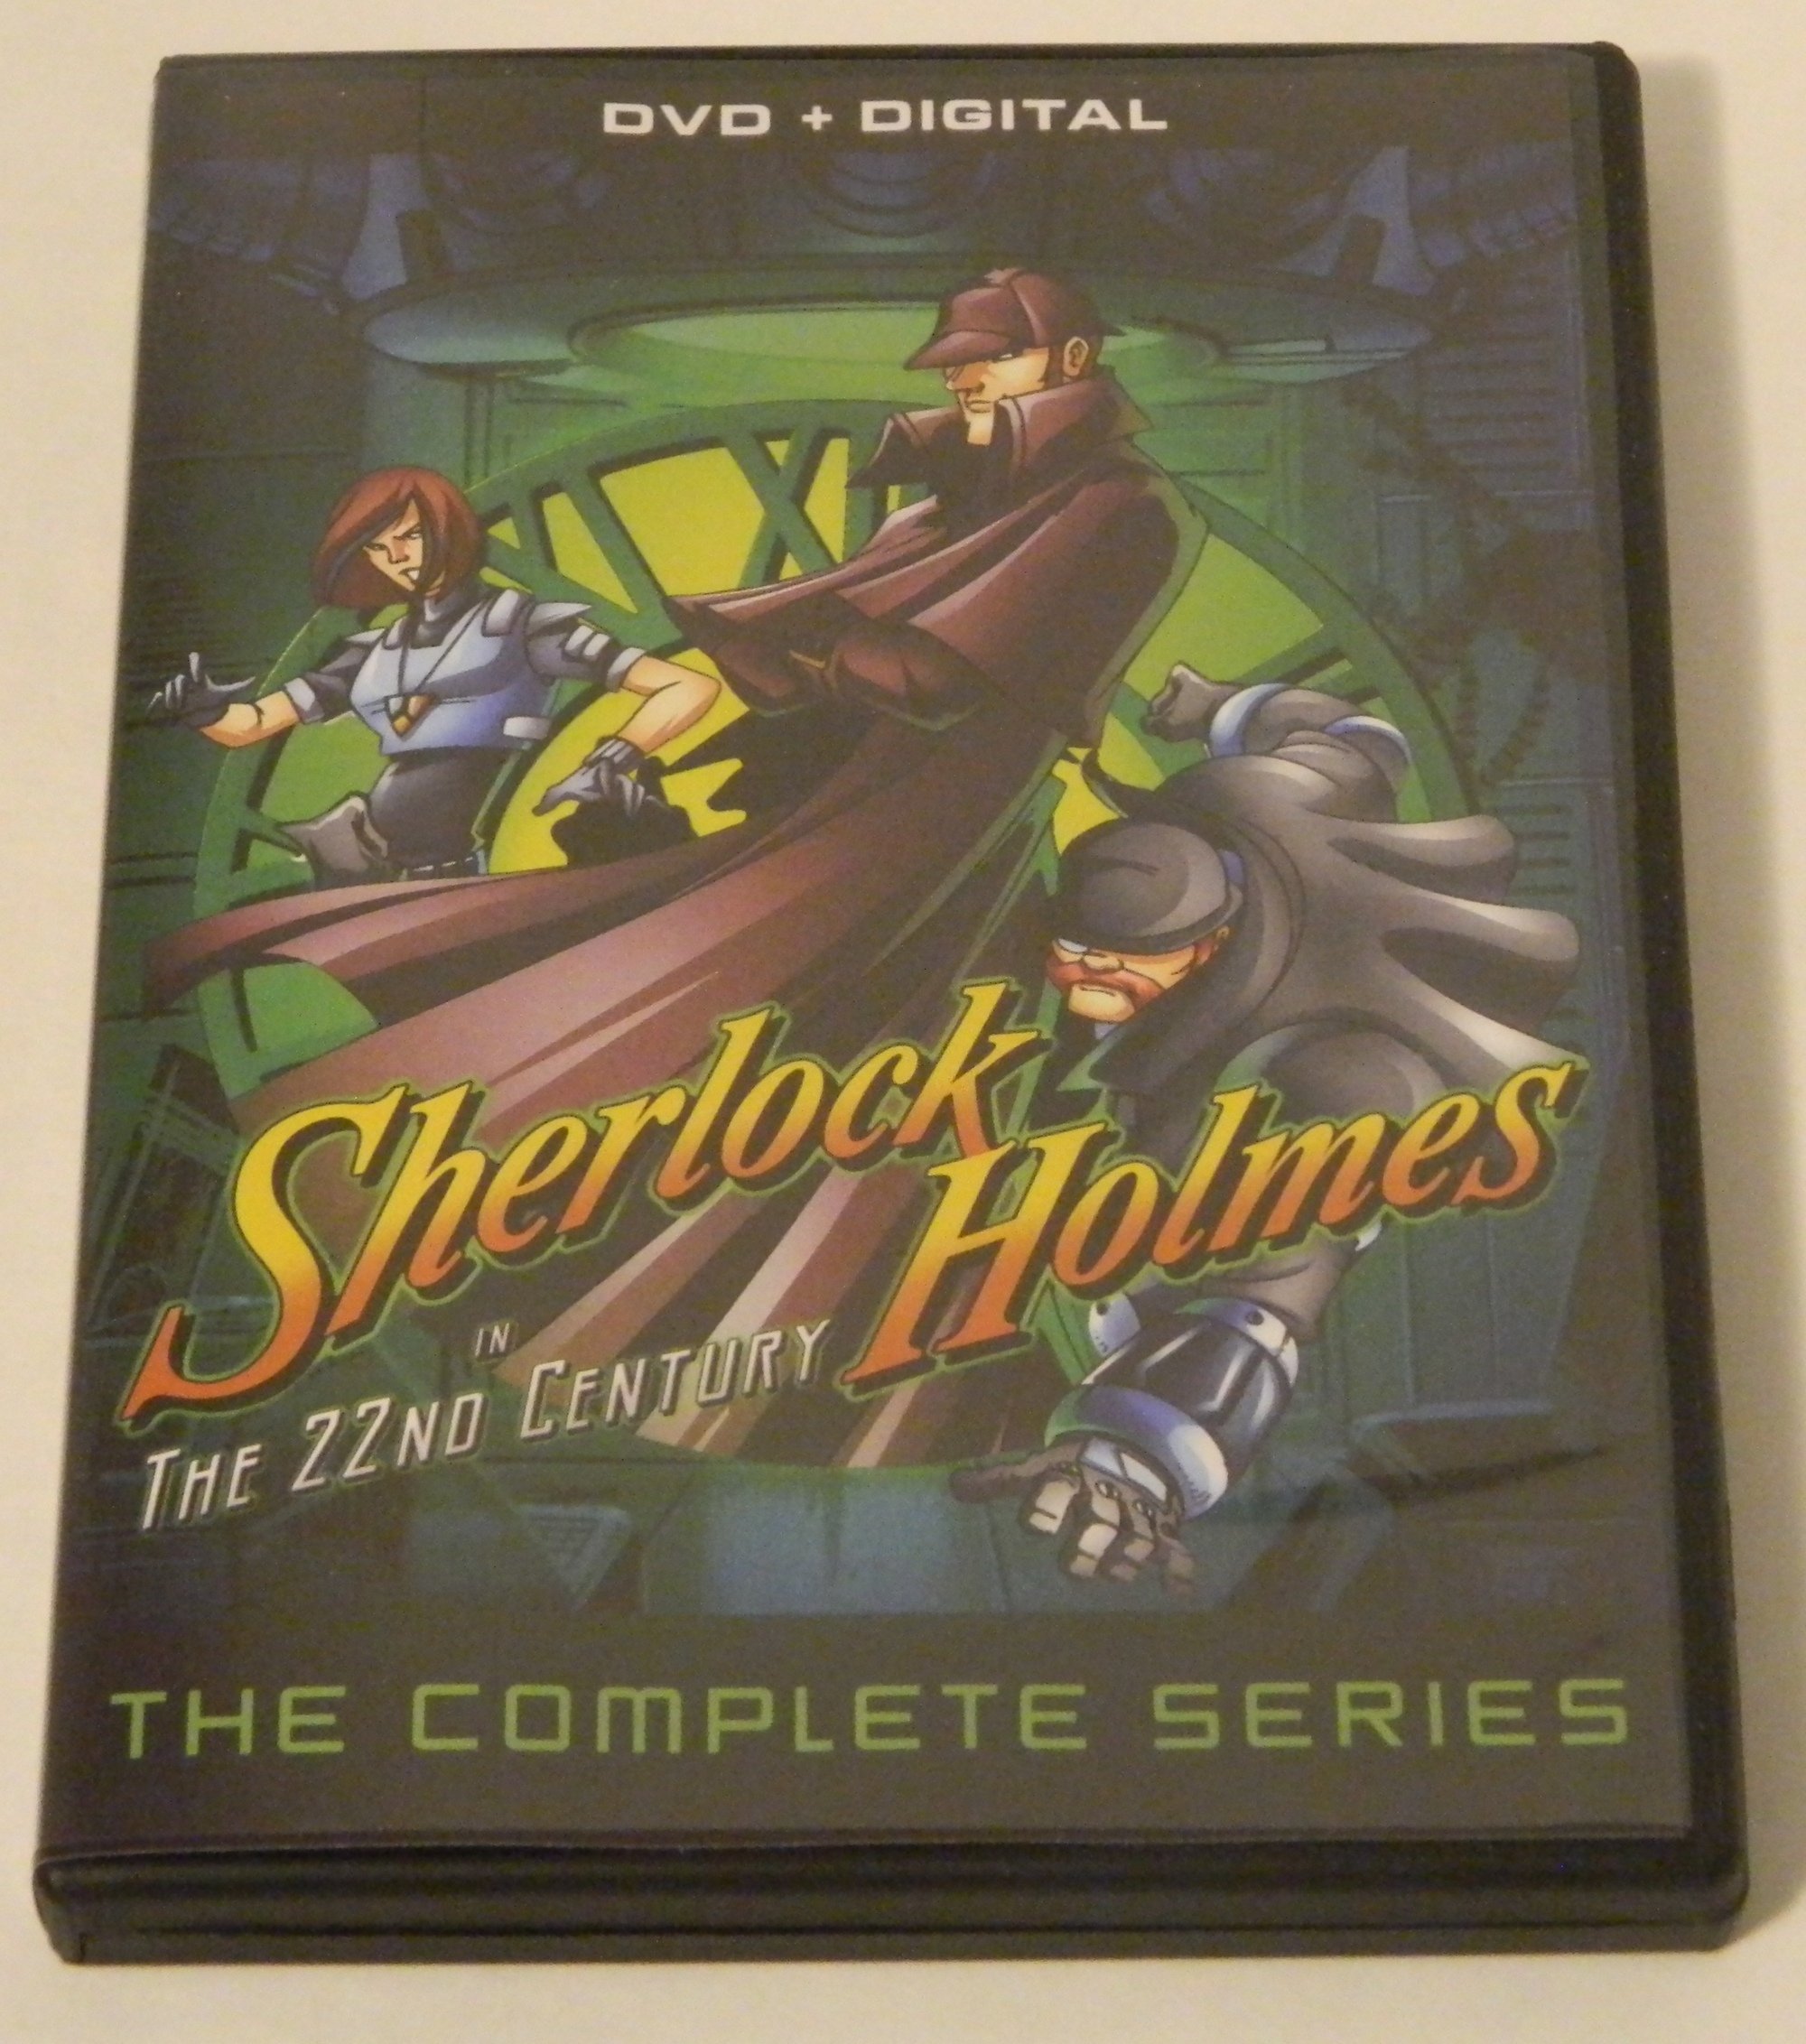 Sherlock Holmes in the 22nd Century: The Complete Series DVD Review